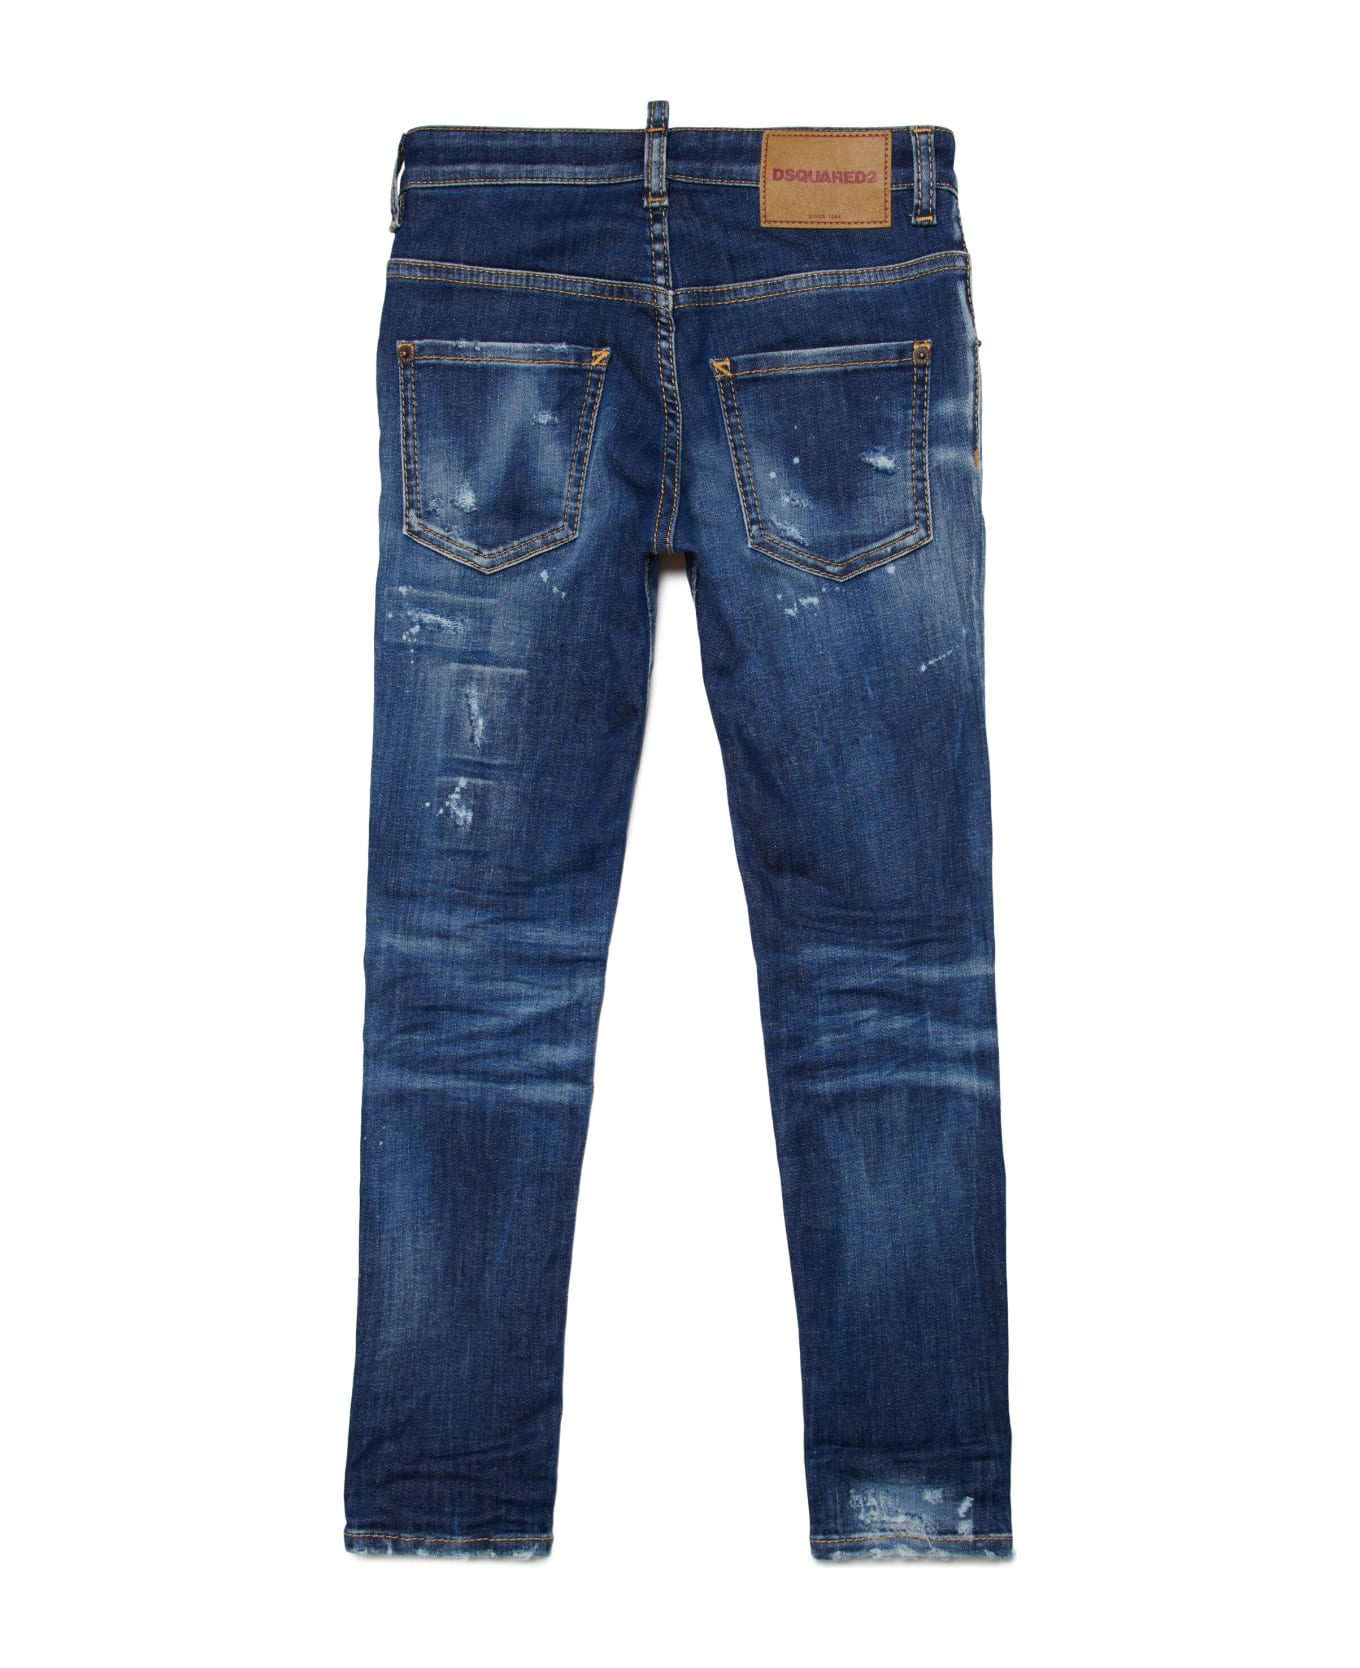 Dsquared2 D2p118lm Skater Jean Trousers Dsquared Dark Skinny Jeans With Spots And Breaks - Skater - Blue